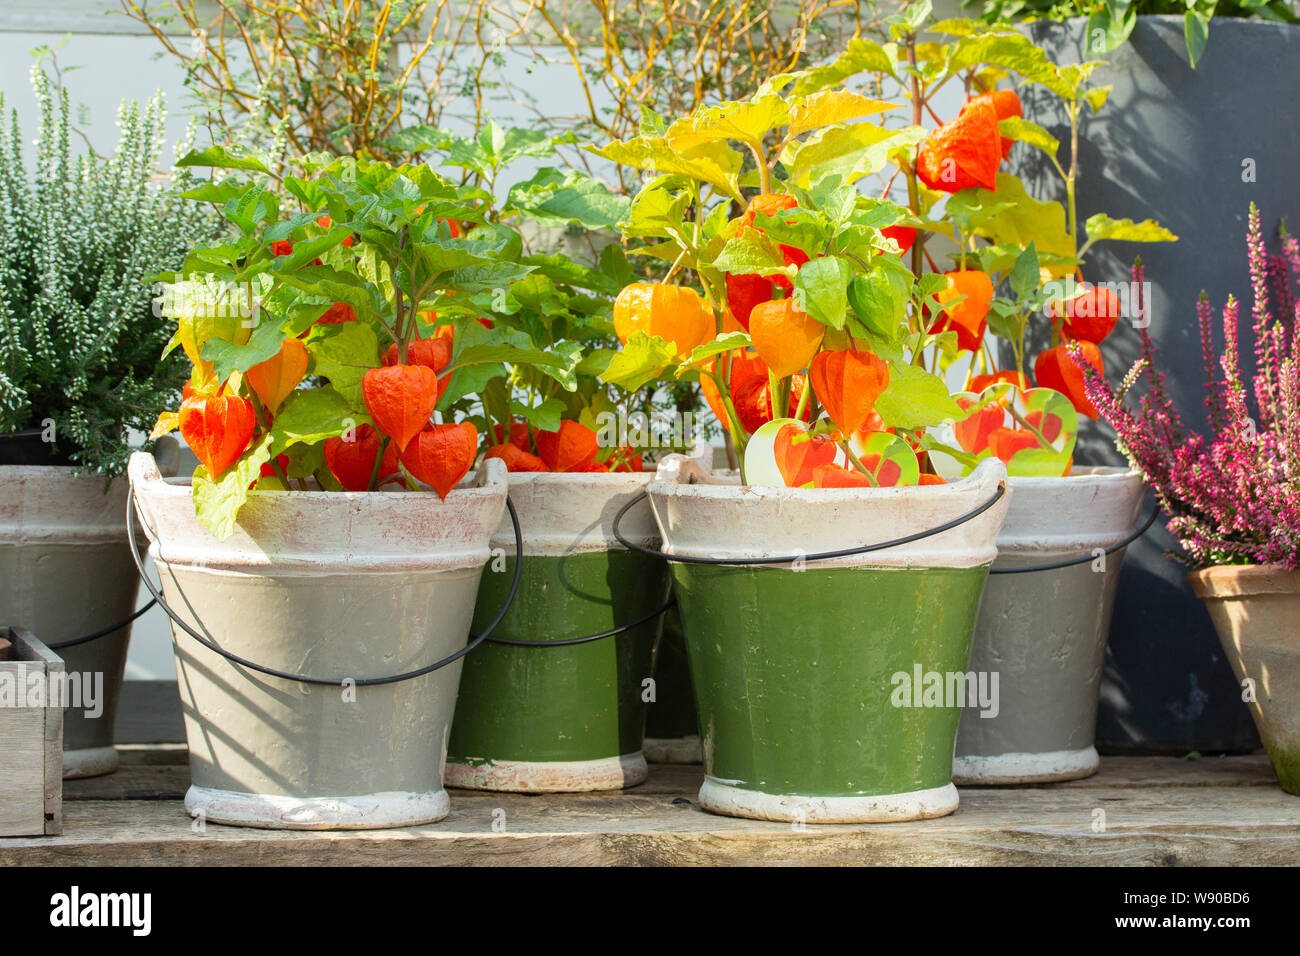 Orange Physalis with green leaves in ceramic pots. Beautiful bright farm plants Physalis red pepper, Mexican tomato Tomatillo. Vegetables in pots, har Stock Photo